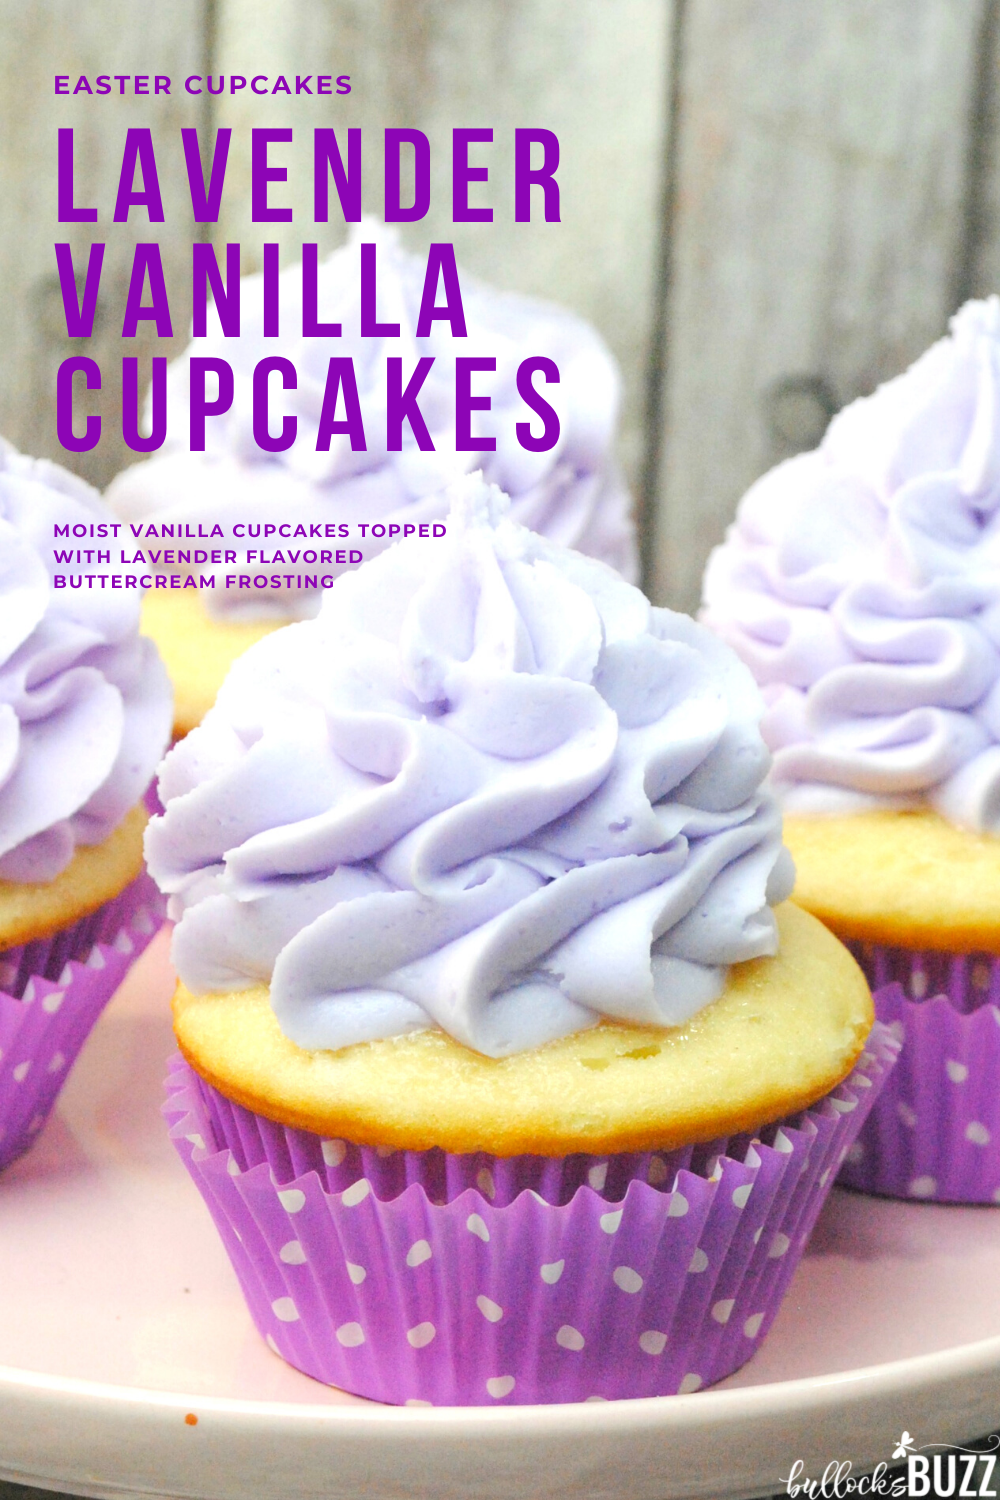 Lavender Vanilla Cupcakes for Easter -   17 cup cake Easter ideas